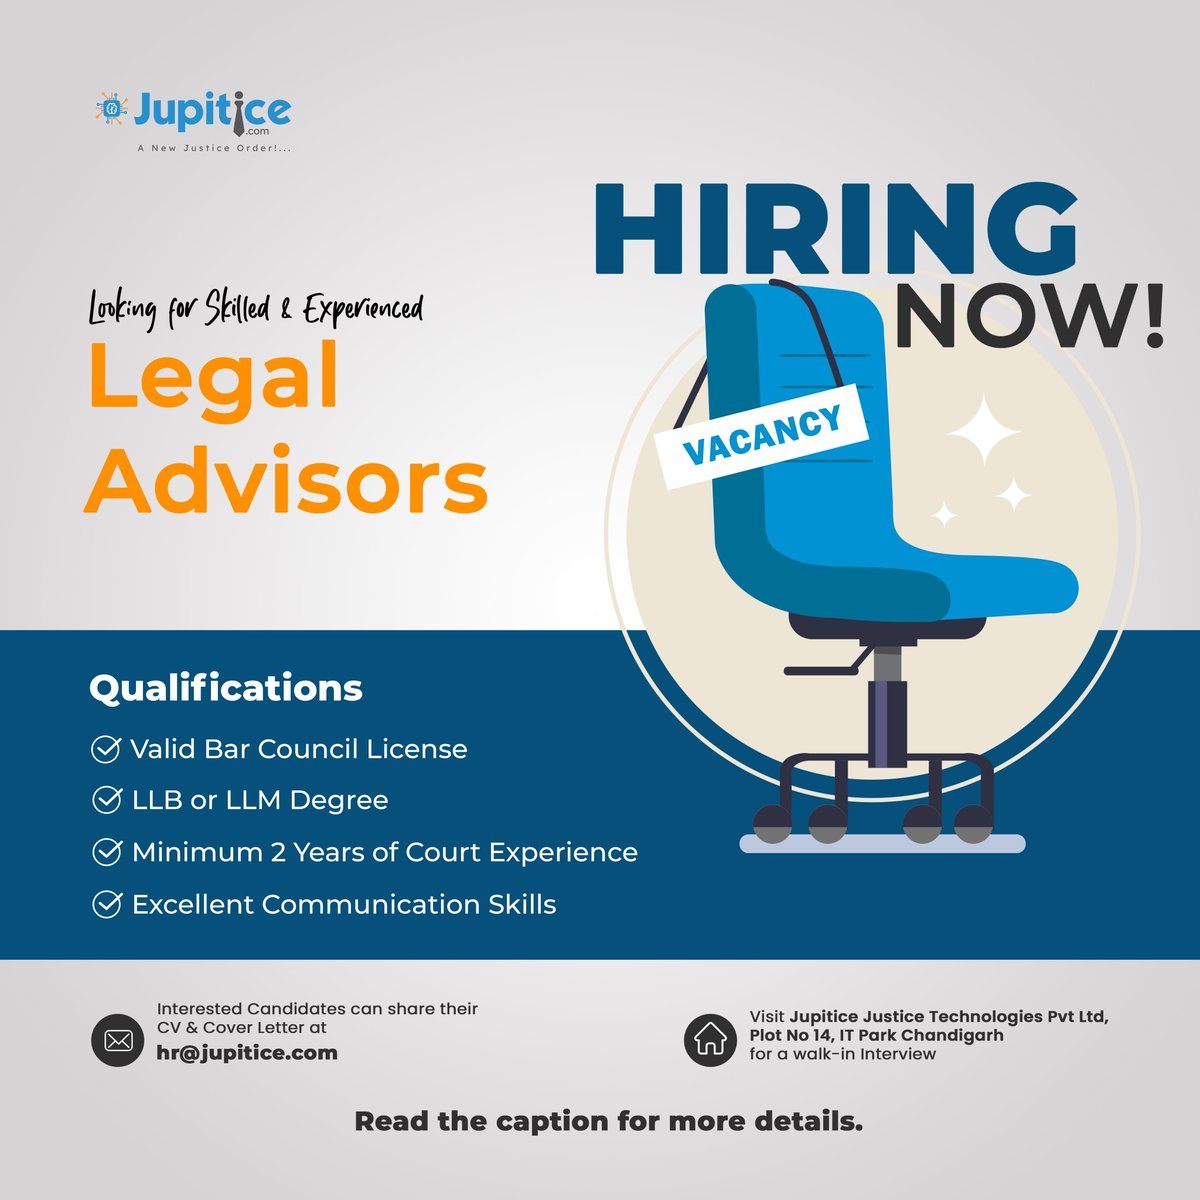 Urgent Hiring!!!

Interested candidates are invited to submit their Resume, Cover Letter, and References to hr@jupitice.com . Please include ' Legal Advisor Application - [Your Name]' in the subject line.

Join us NOW!

#hiring #jobsearch #legal #law #legaljob #legalopportunity